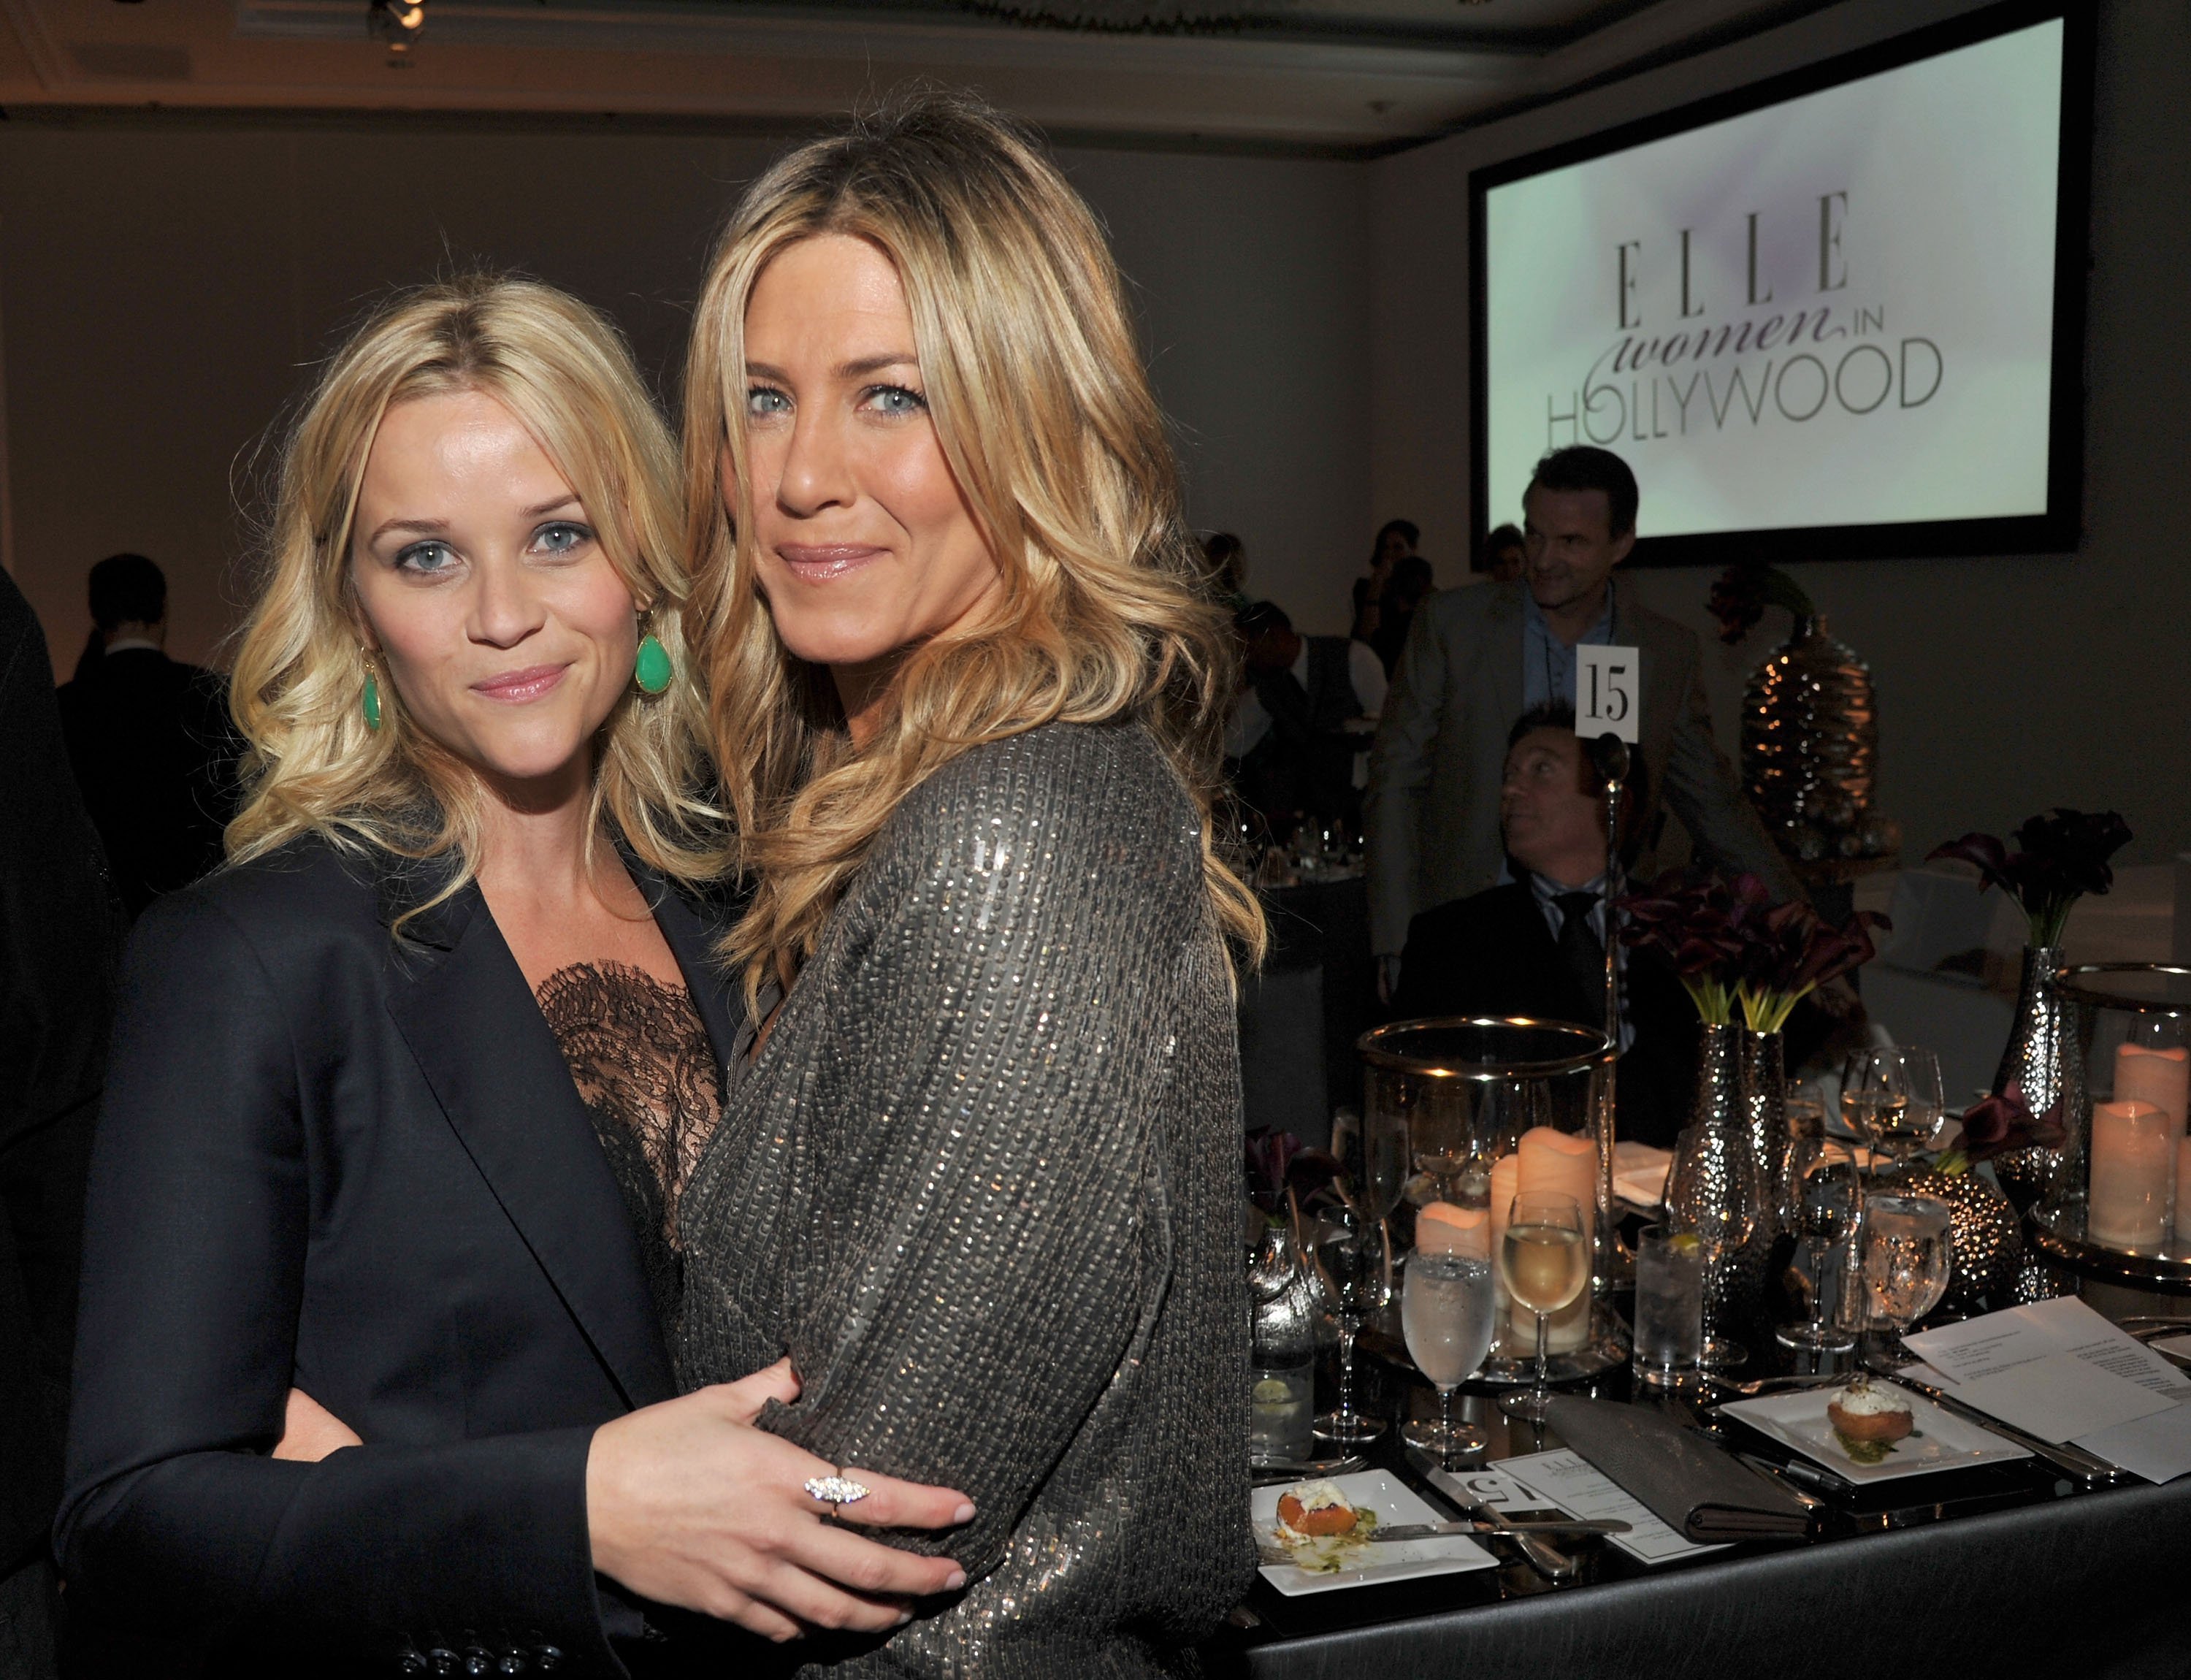 Reese Witherspoon (L) and Jennifer Aniston attend ELLE's 18th Annual Women in Hollywood Tribute on October 17, 2011 in Beverly Hills, California. | Source: Getty Images.